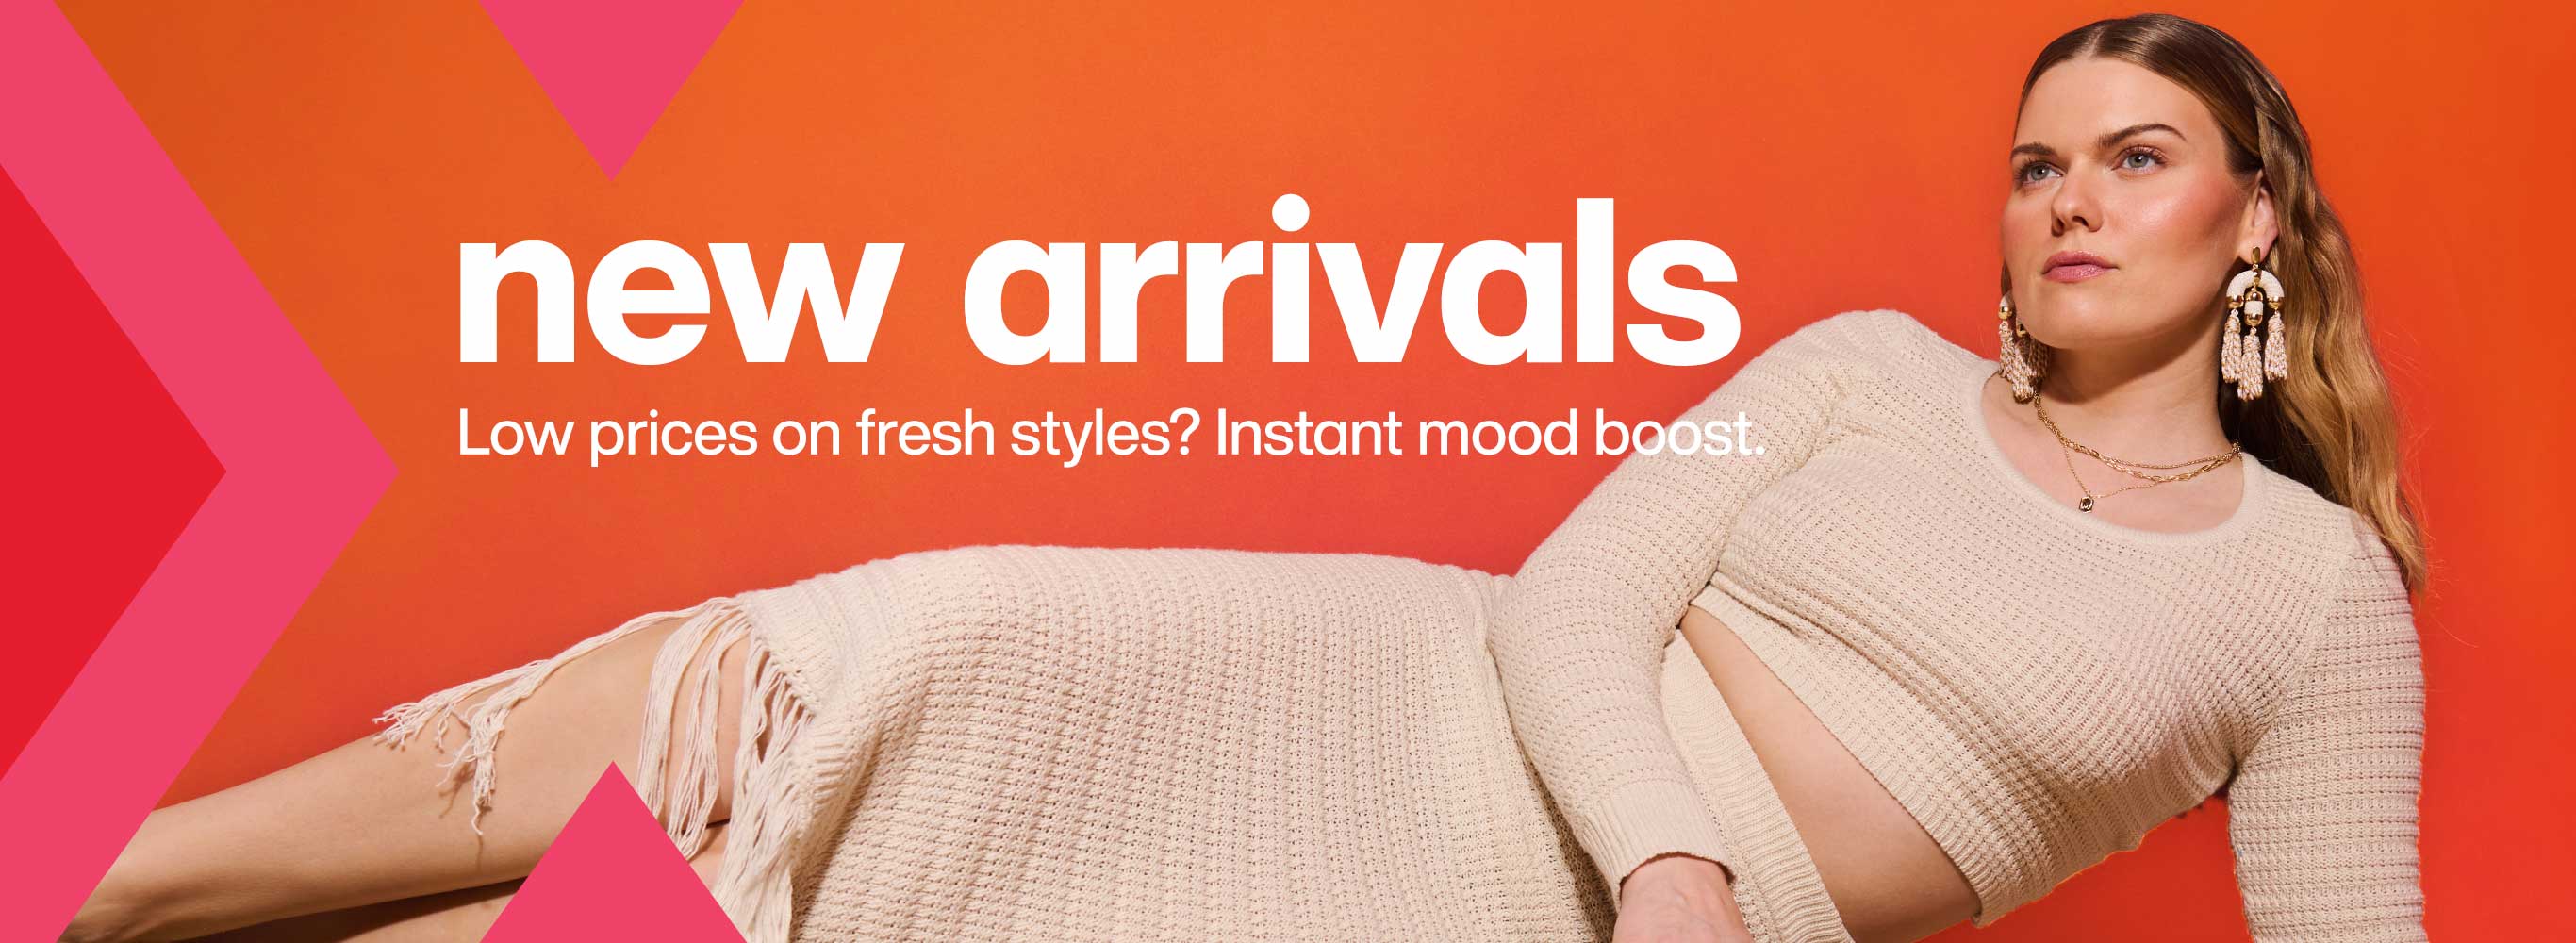 New arrivals. Low prices on fresh styles? Instant mood boost.